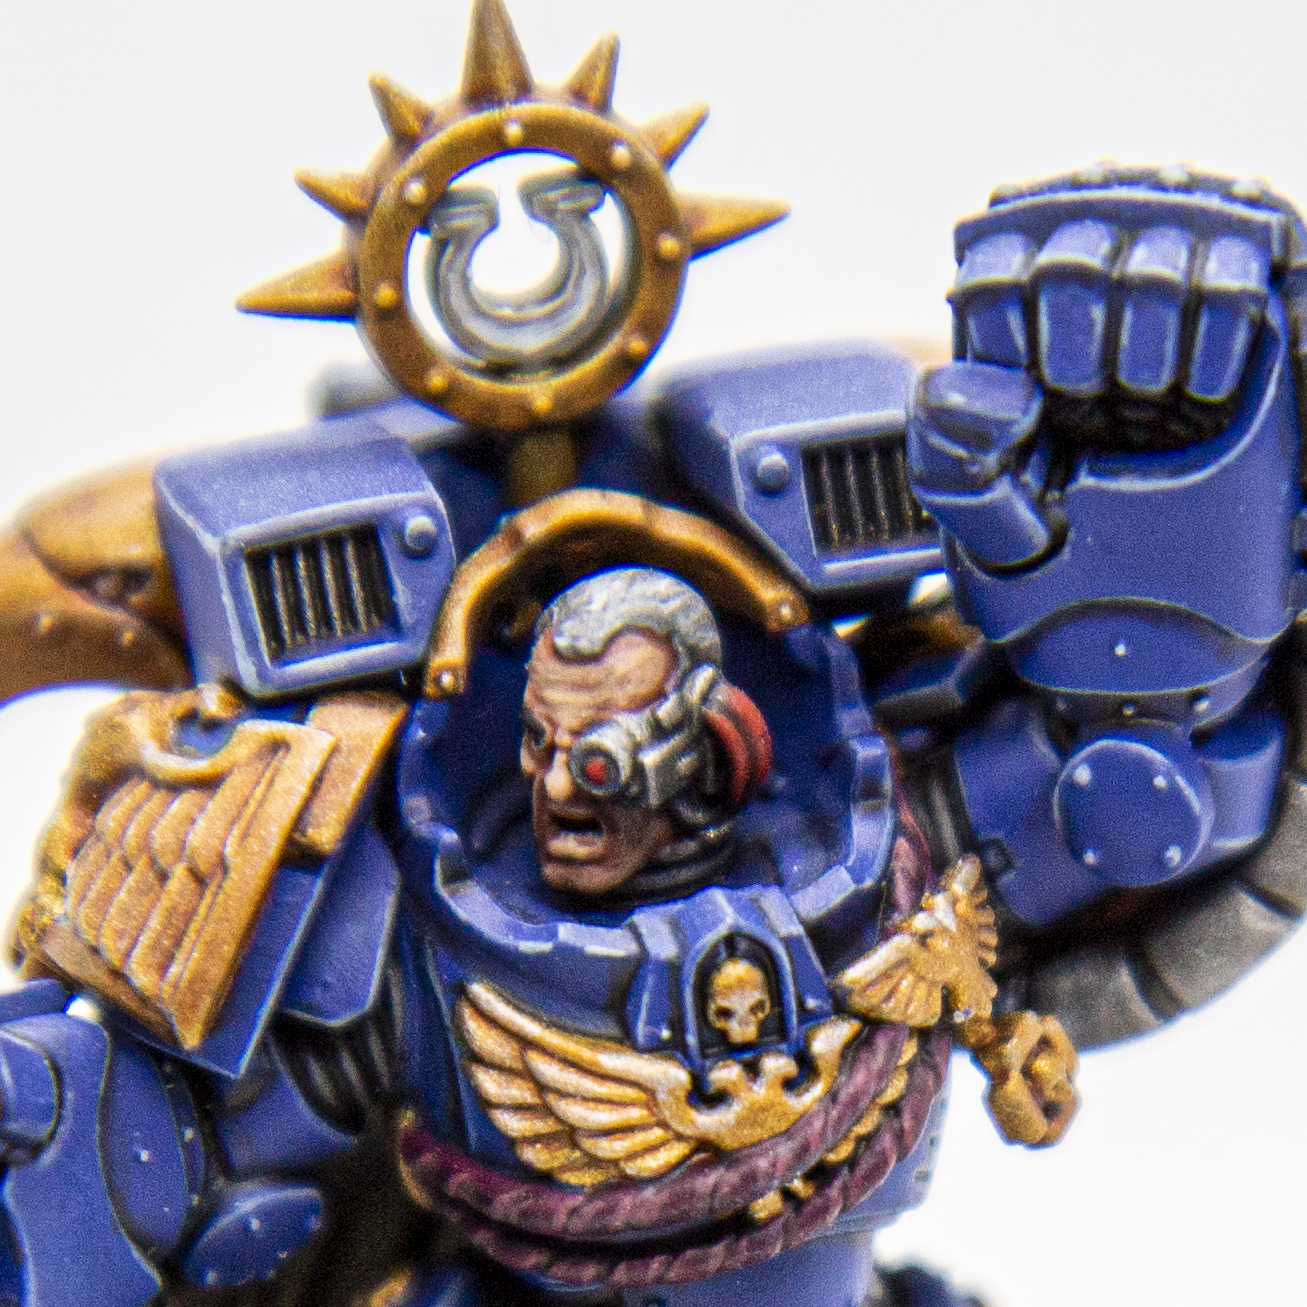 Calgar with honor guard. I will be extremely glad to any criticism) - My, Warhammer 40k, Warhammer, Ultramarines, Marneus Calgar, Painting miniatures, Acrylic, Longpost